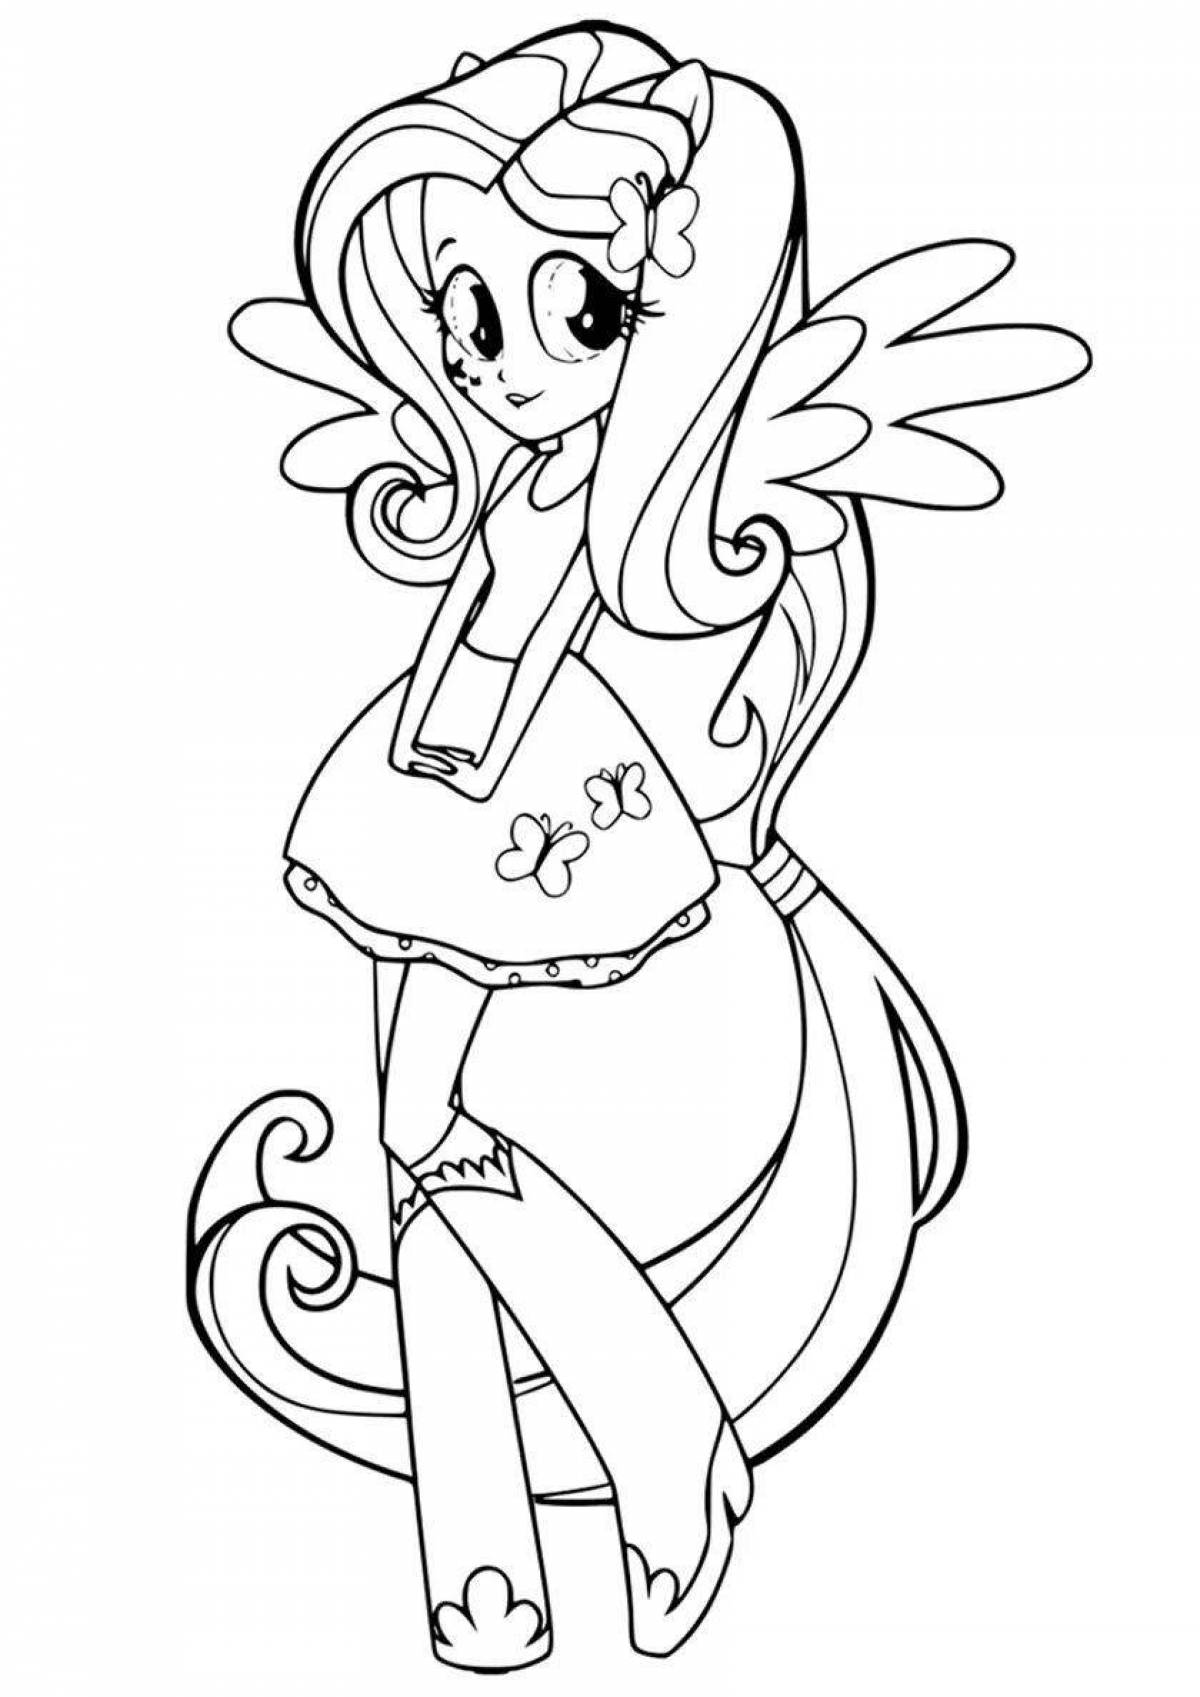 Adorable pony doll coloring book